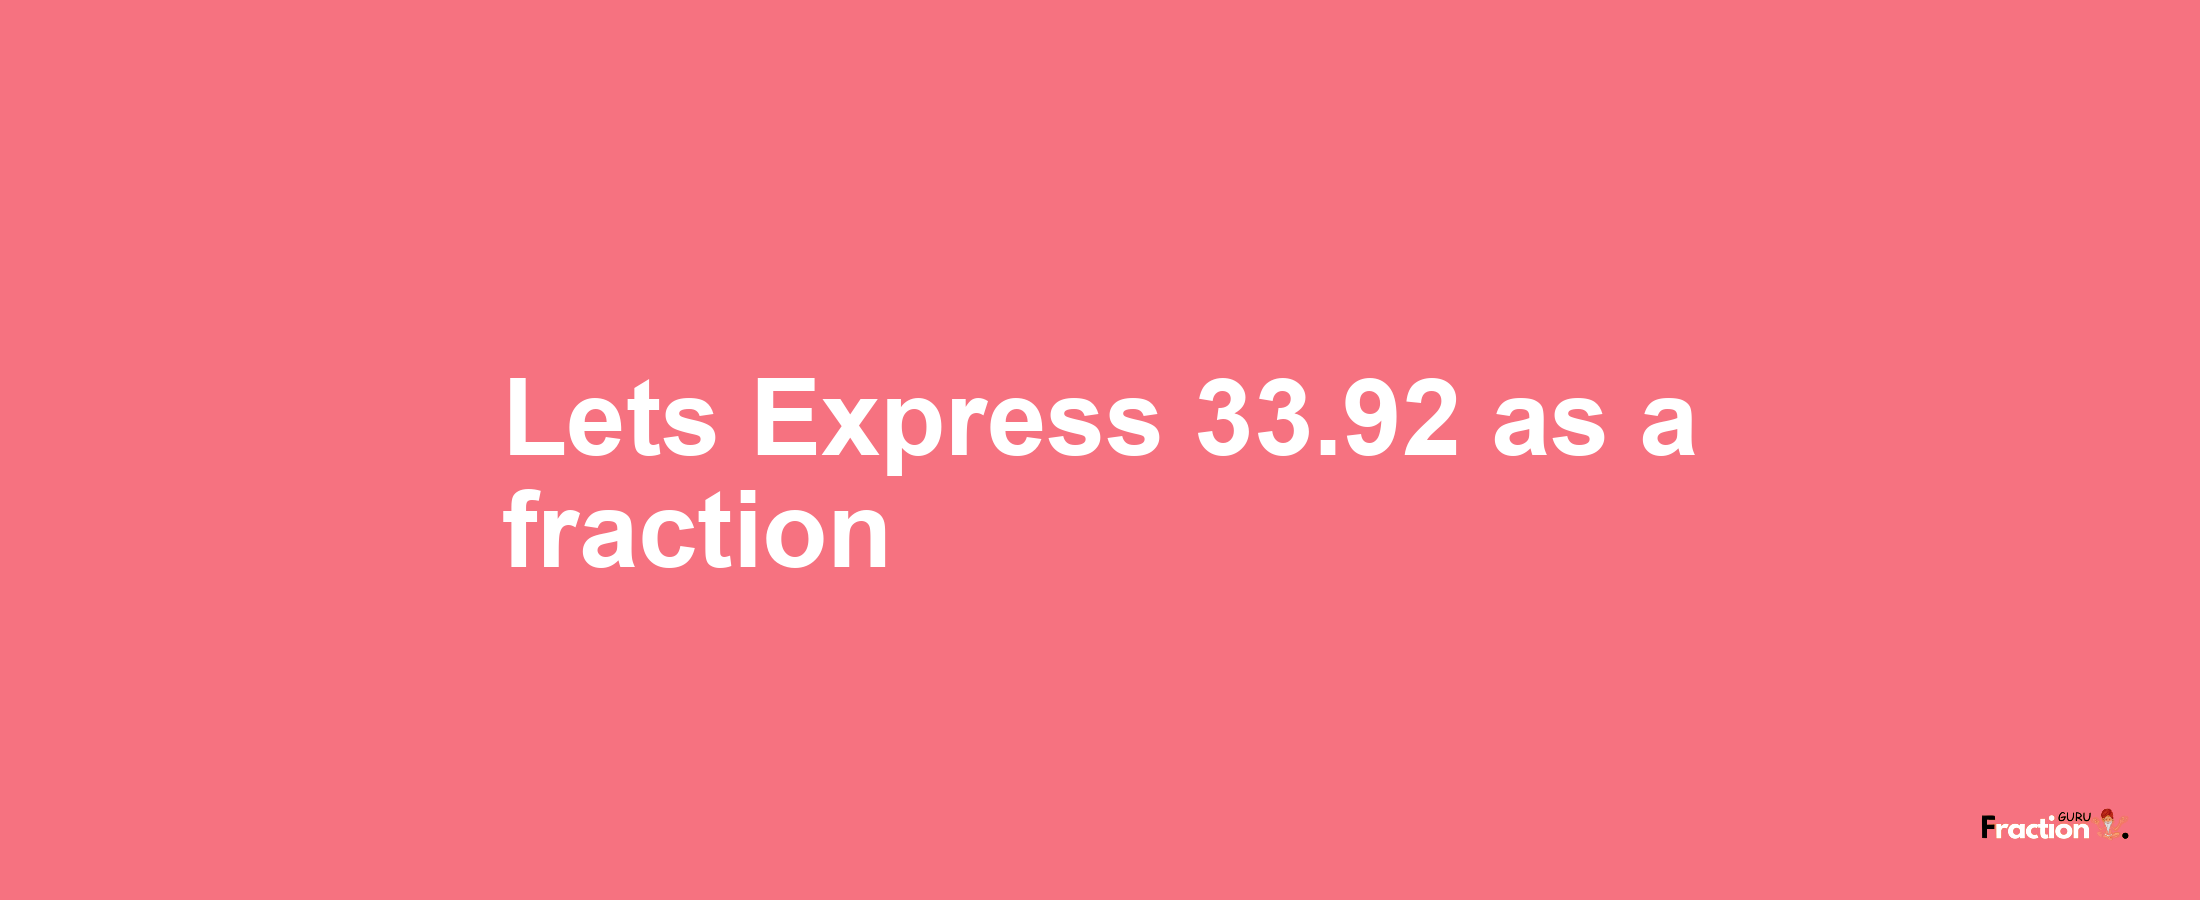 Lets Express 33.92 as afraction